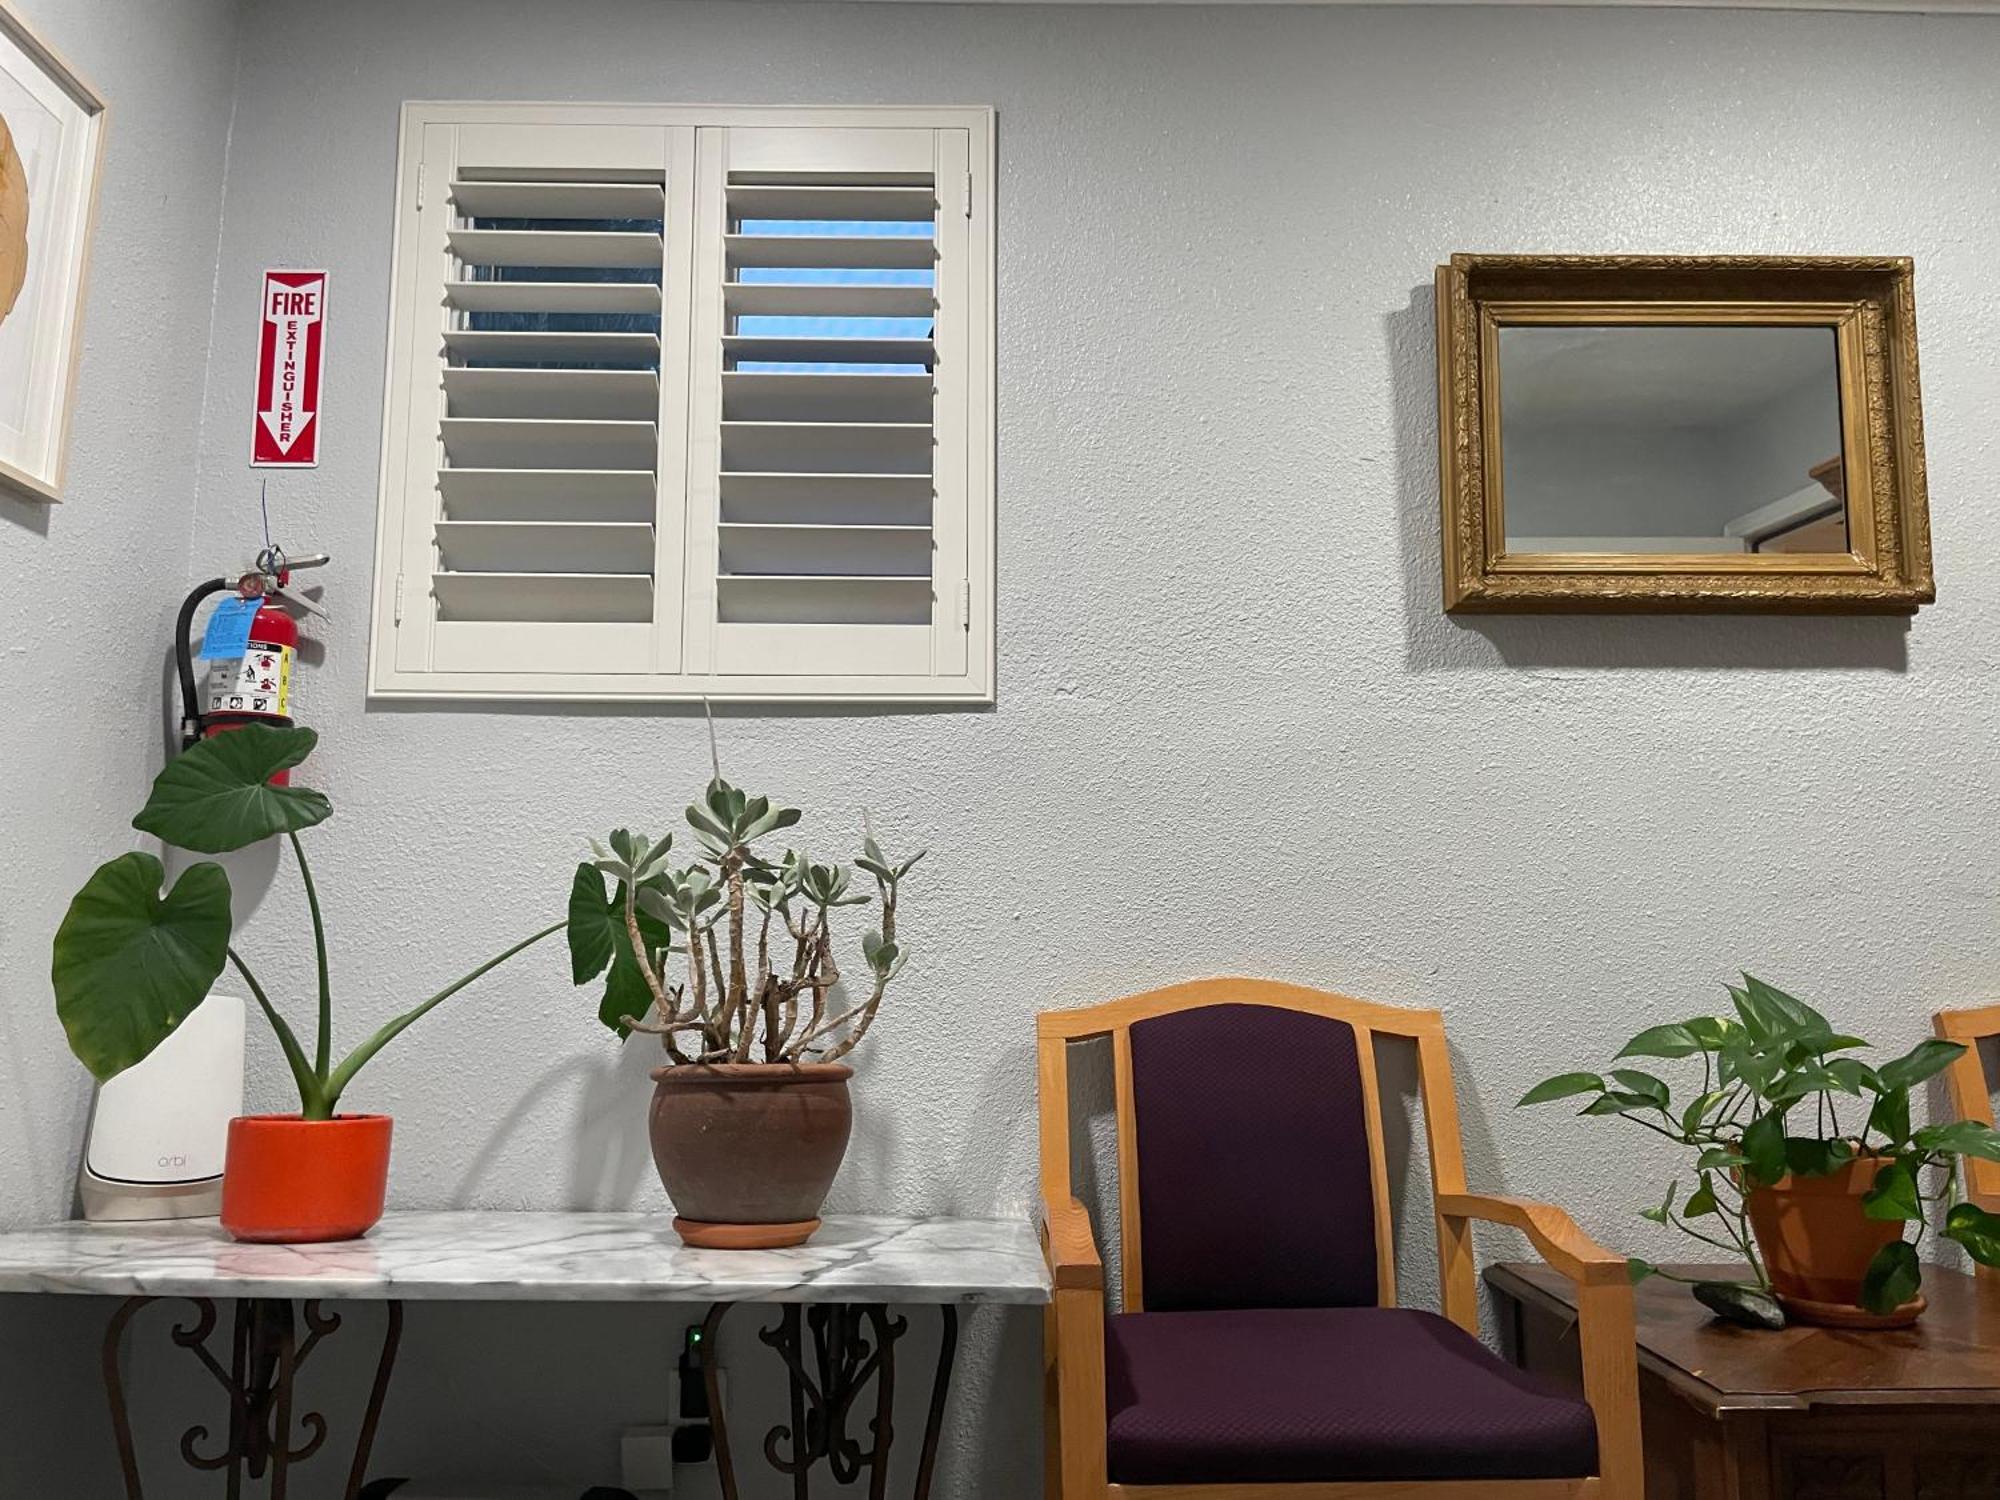 Small Private Room In Los Angeles With Free Strong Wifi!!! Extérieur photo